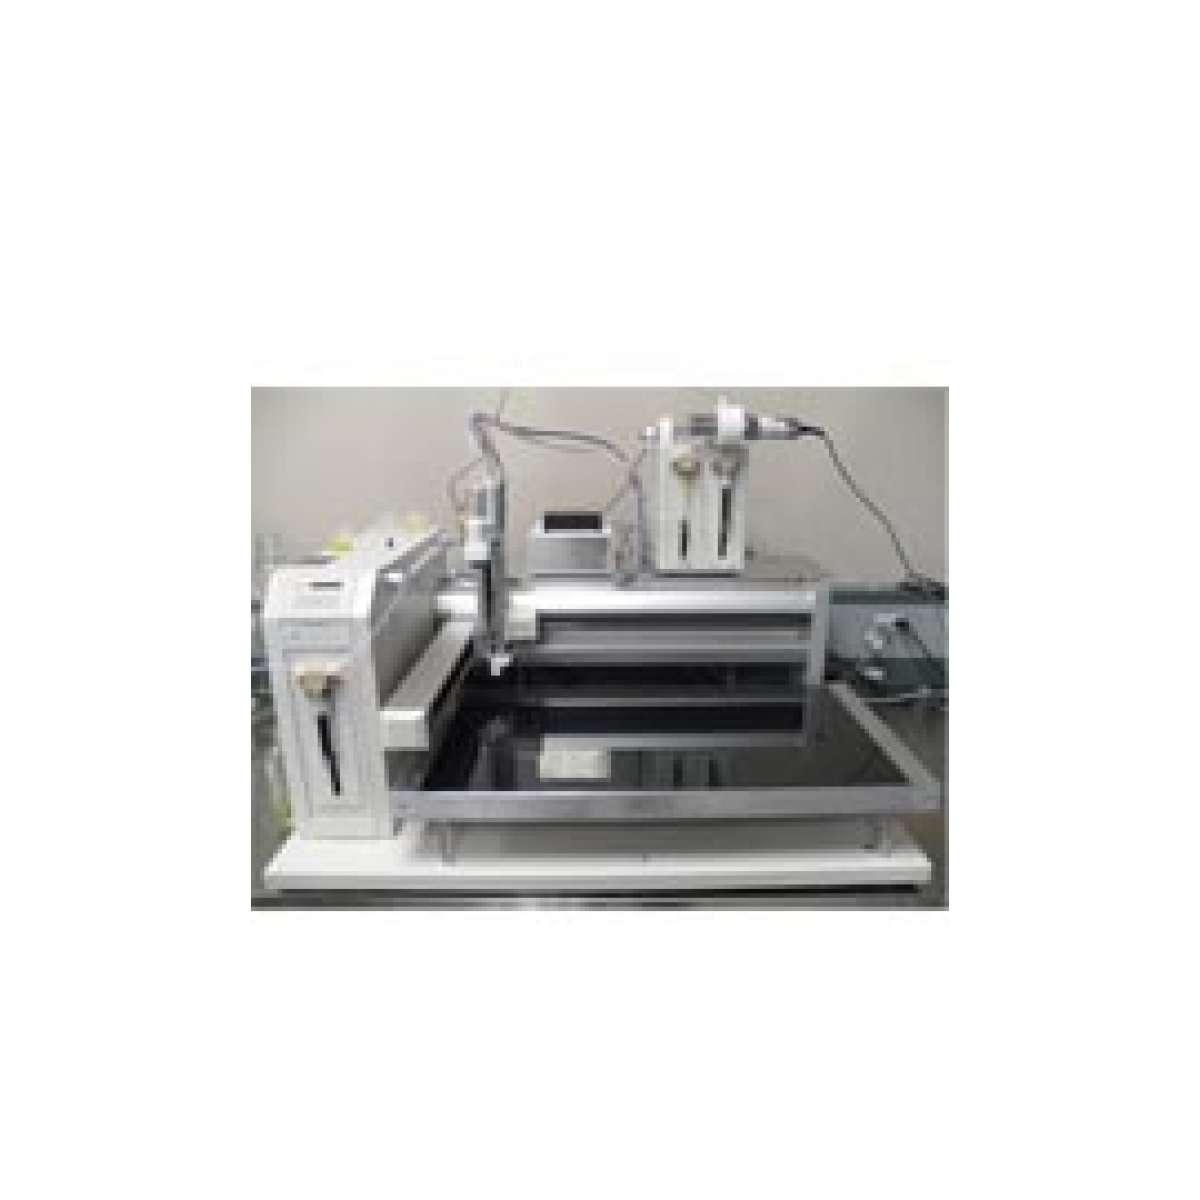 Automated Particle Counter with Auto-Leveling/Dilution